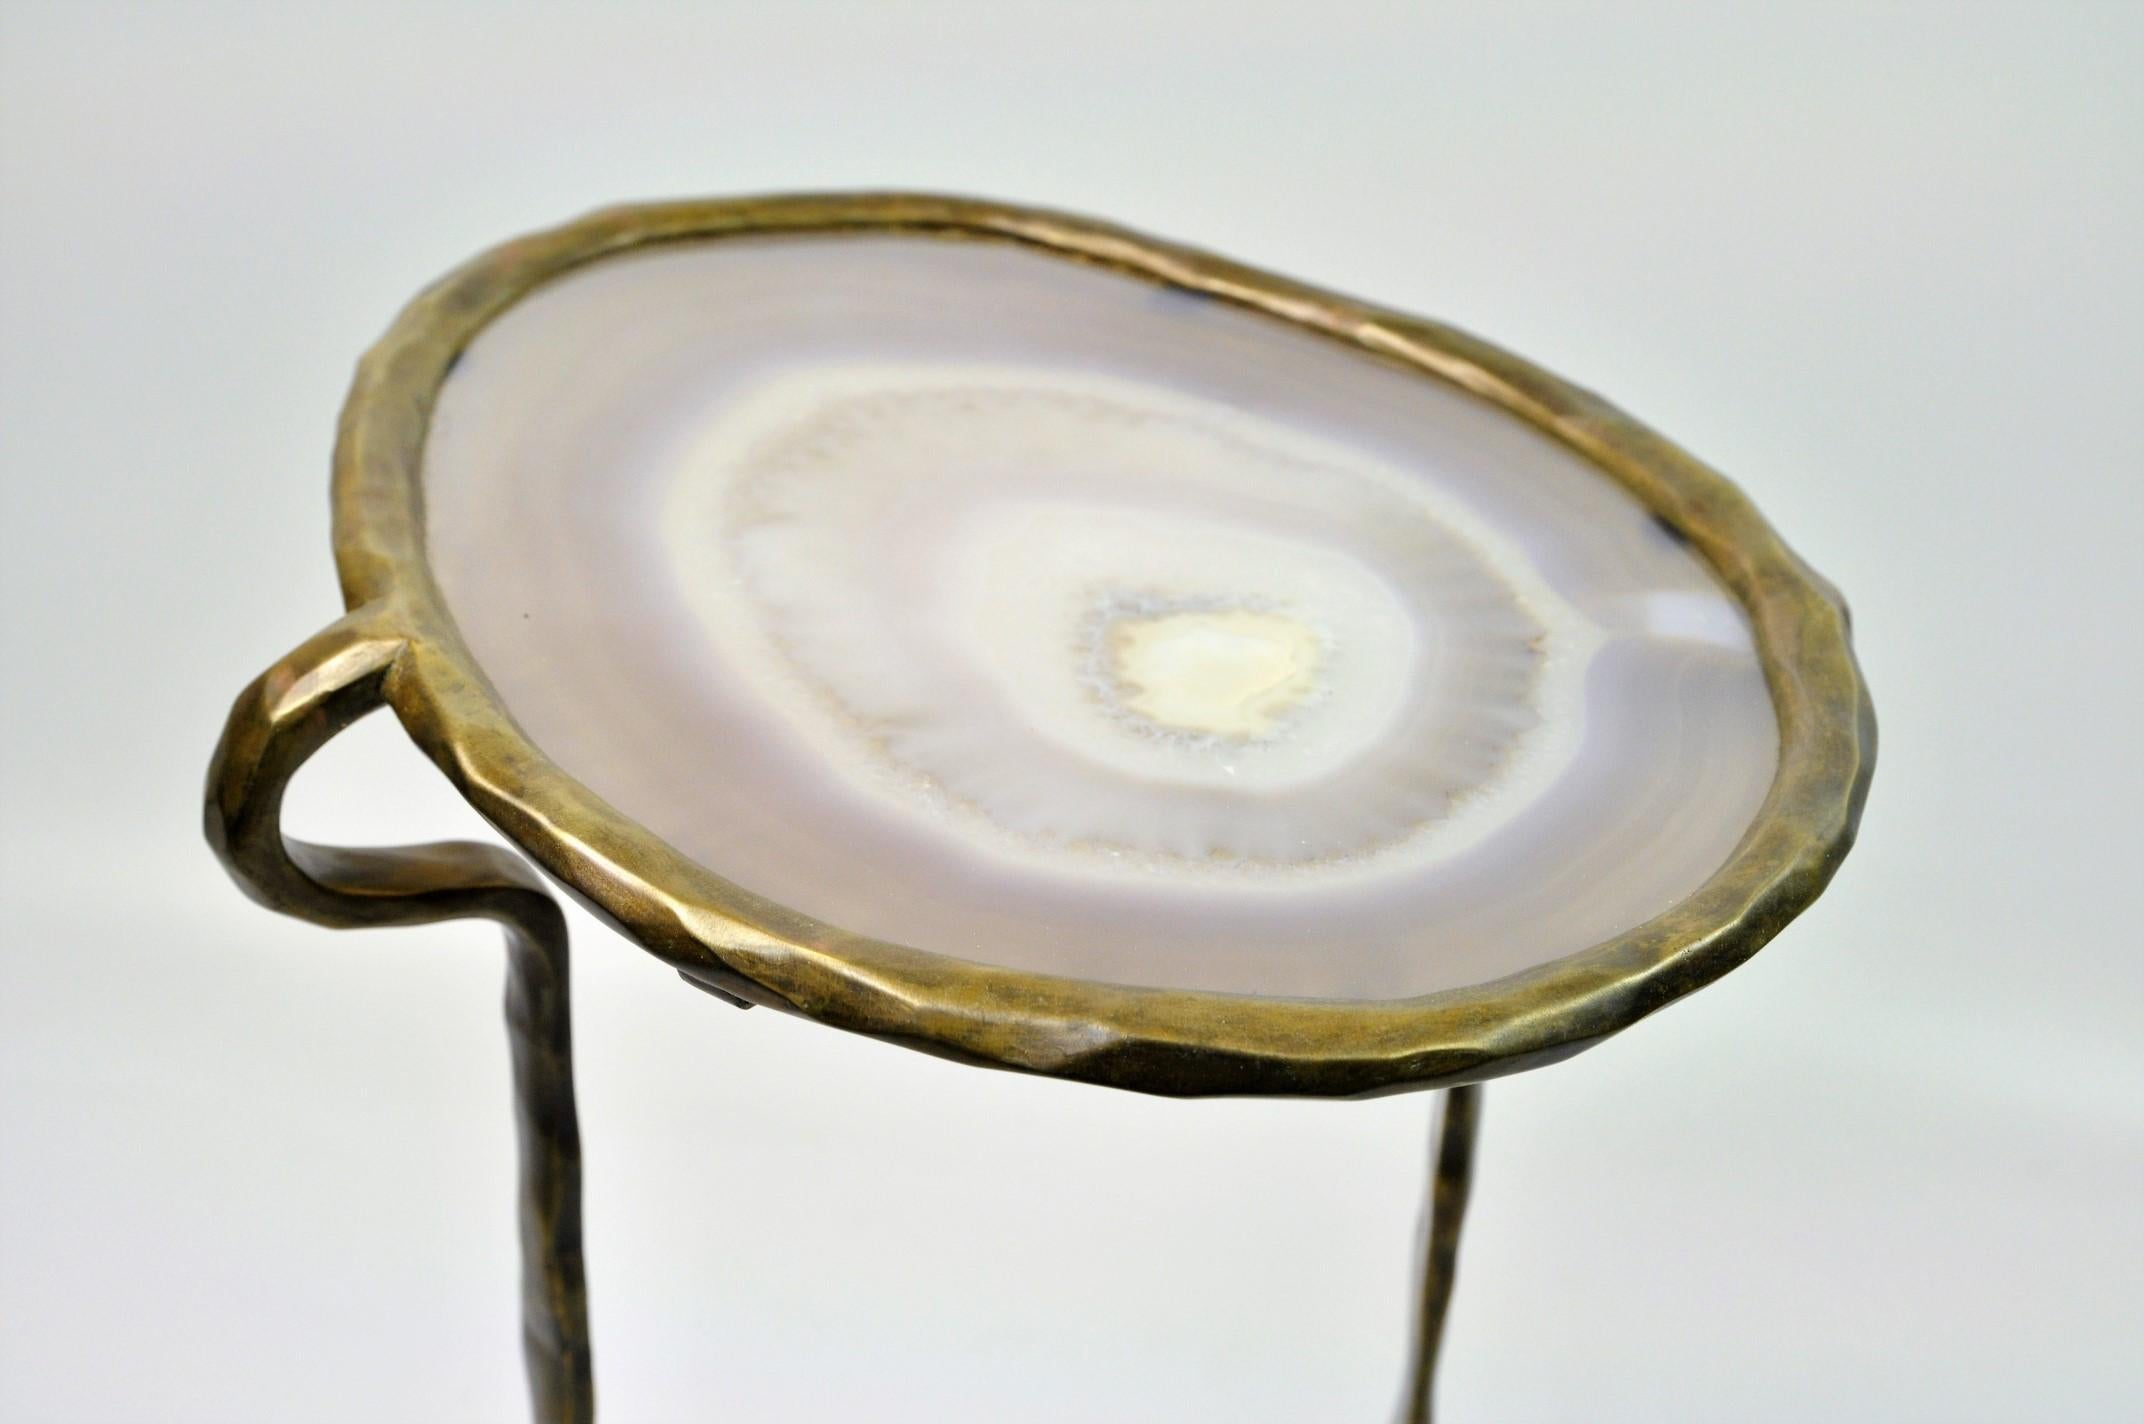 The SERPENT side table is a unique piece made of lost wax cast brass patinated in bronze with a beautiful large agate slice top.
The brass has been casted around the agate slice to fit perfectly its natural shape.
The natural agate gives a real